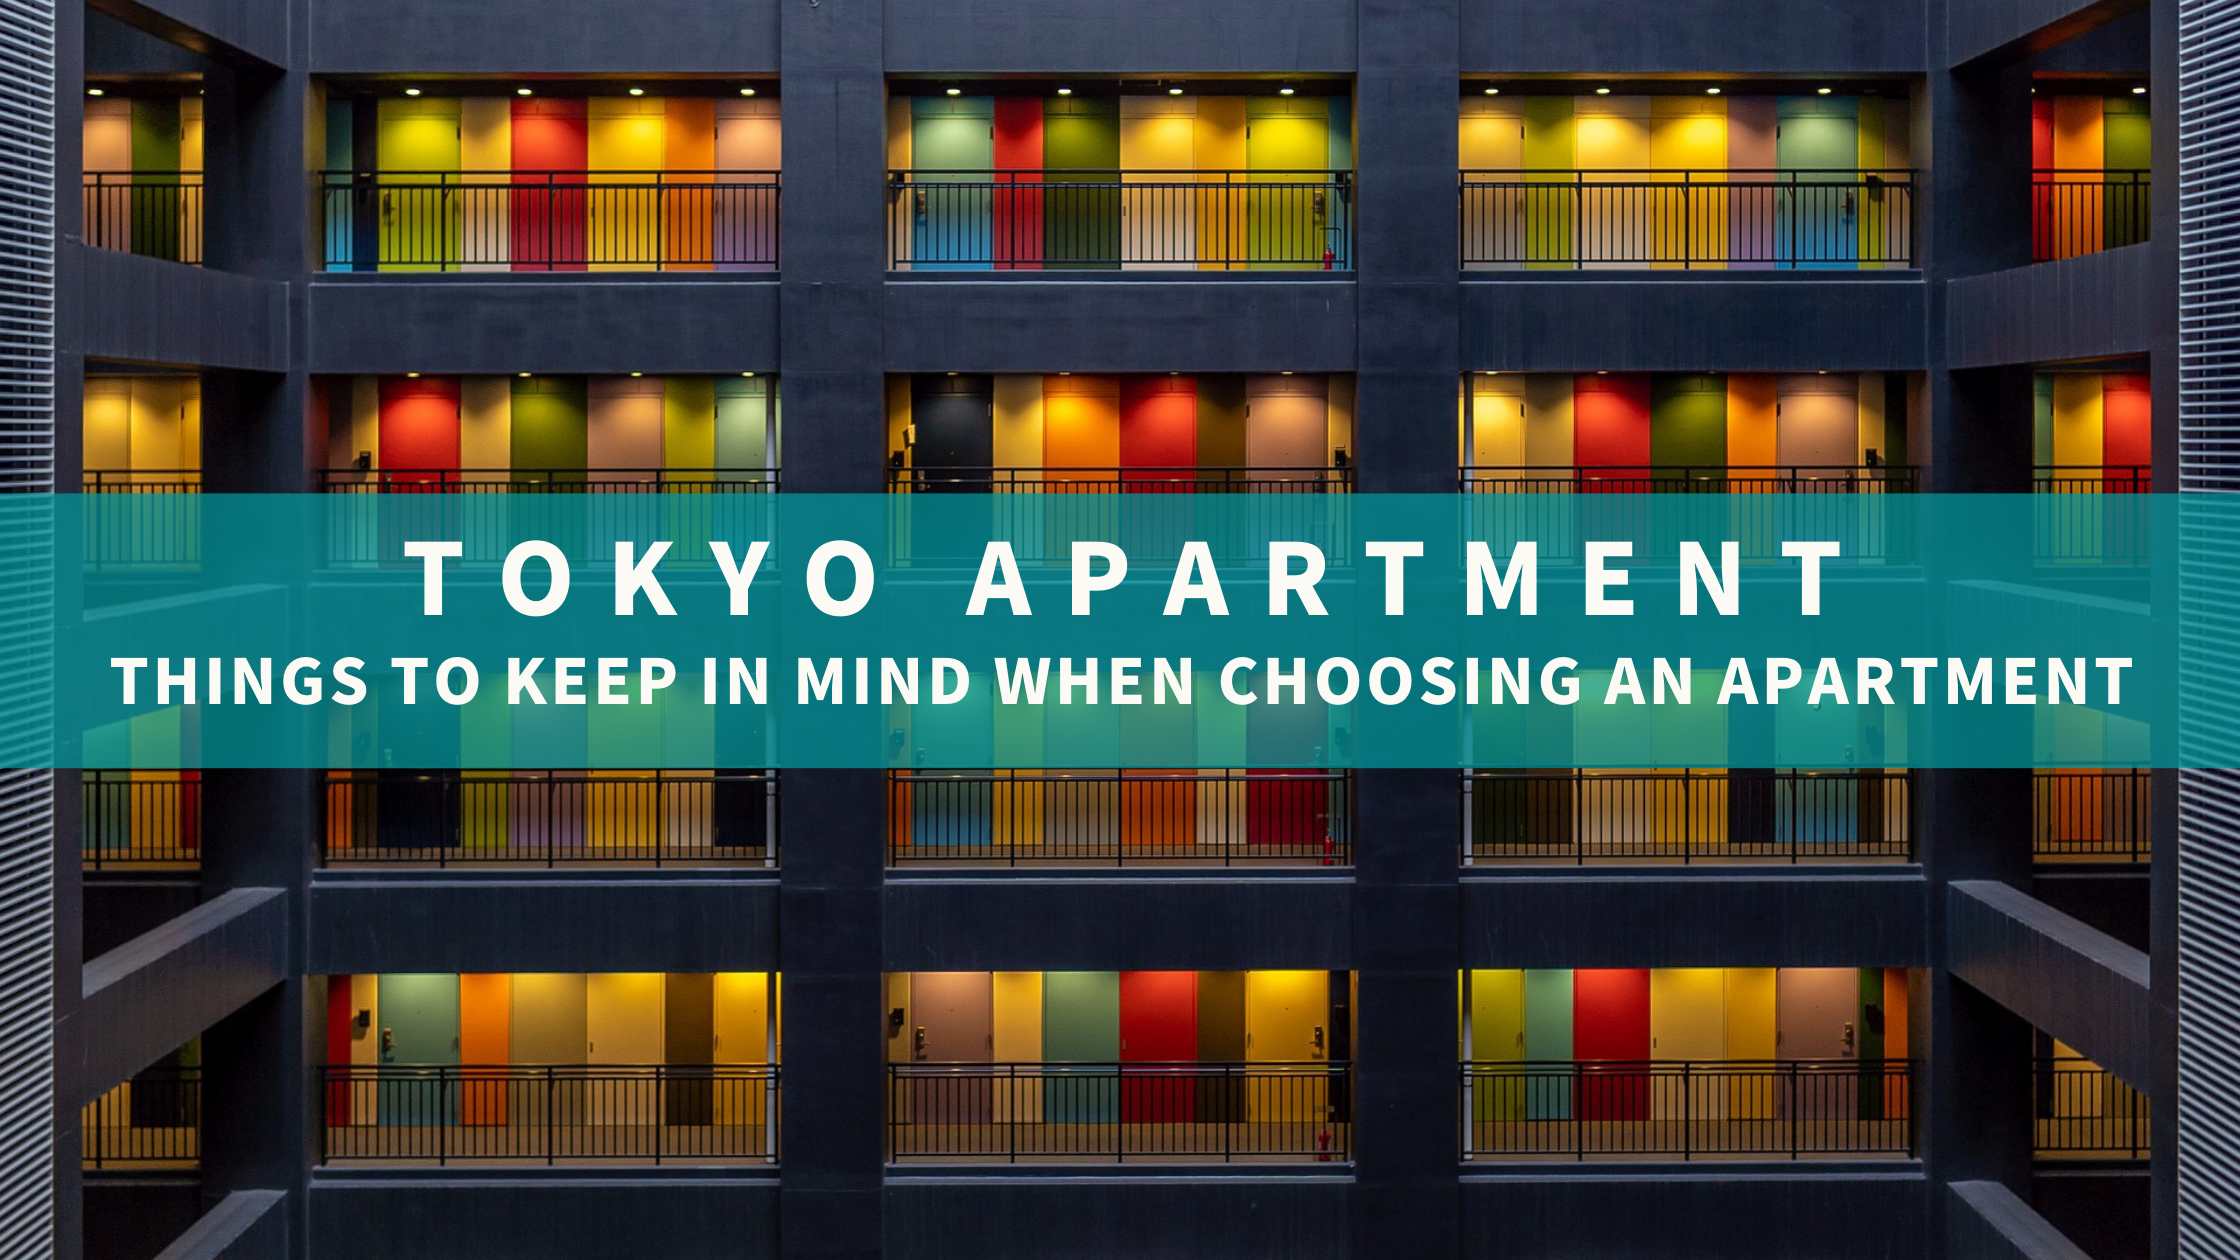 Life in Tokyo: Things to keep in mind when choosing an apartment.